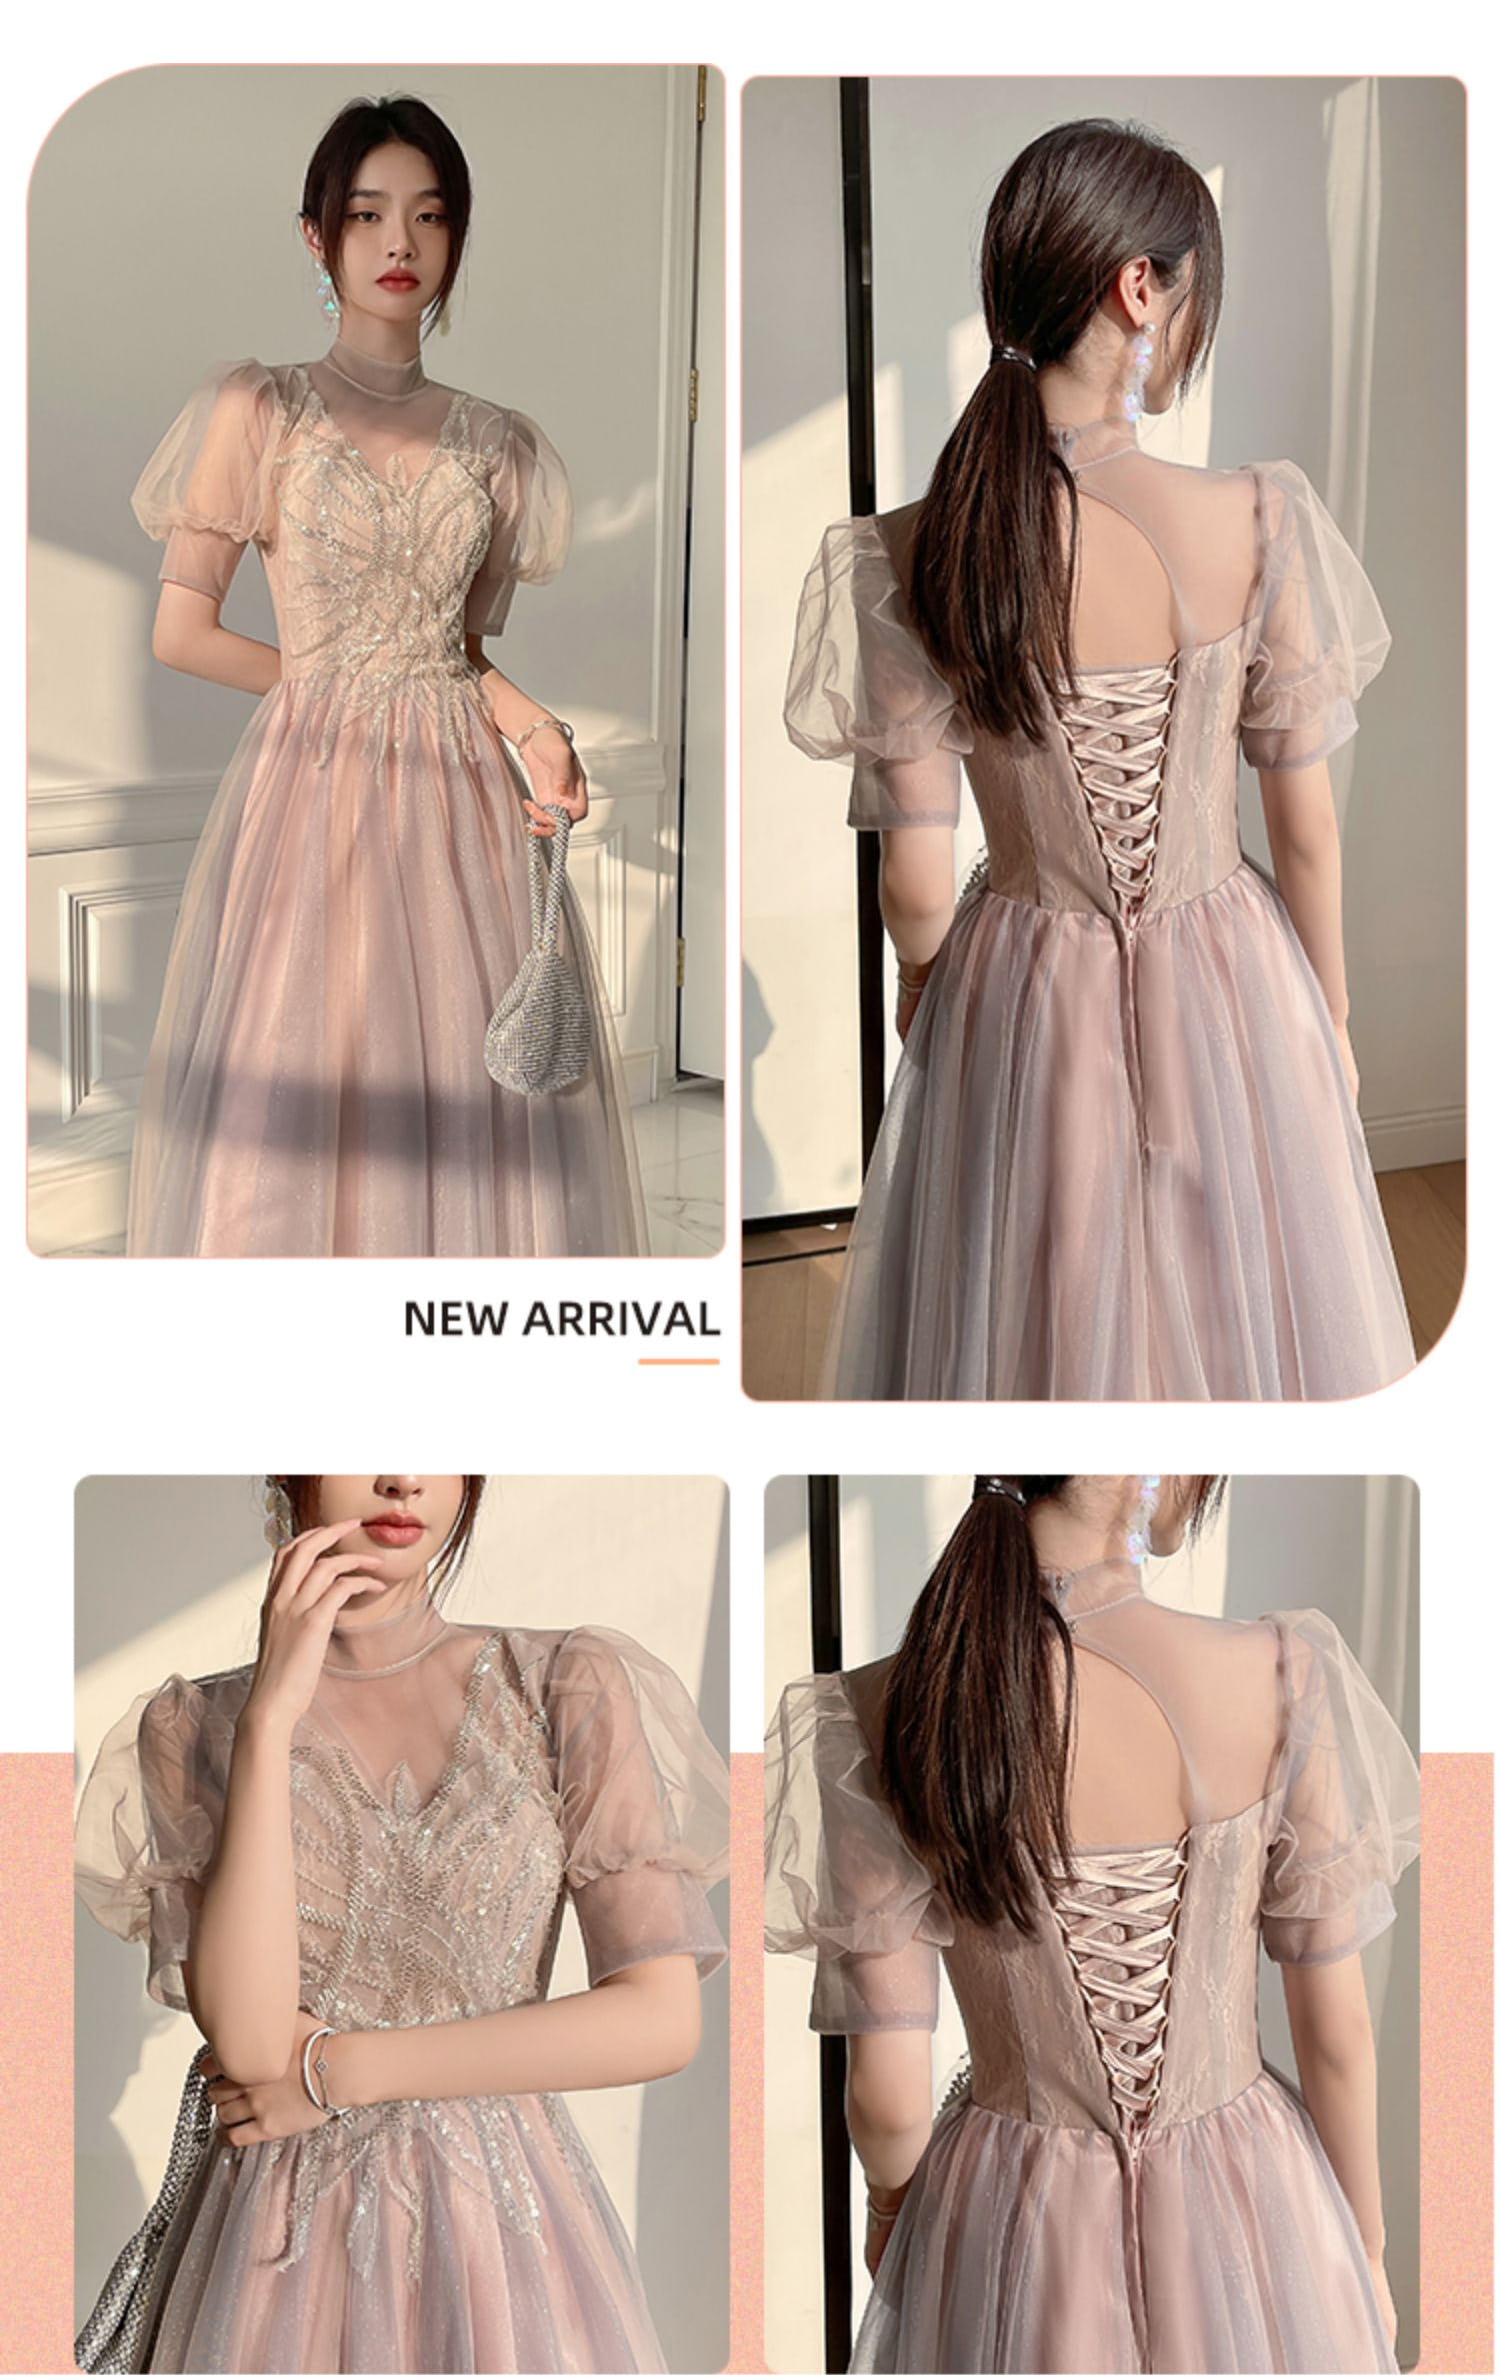 Elegant-Pale-Pink-Maxi-Bridesmaid-Dress-Long-Party-Ball-Gown22